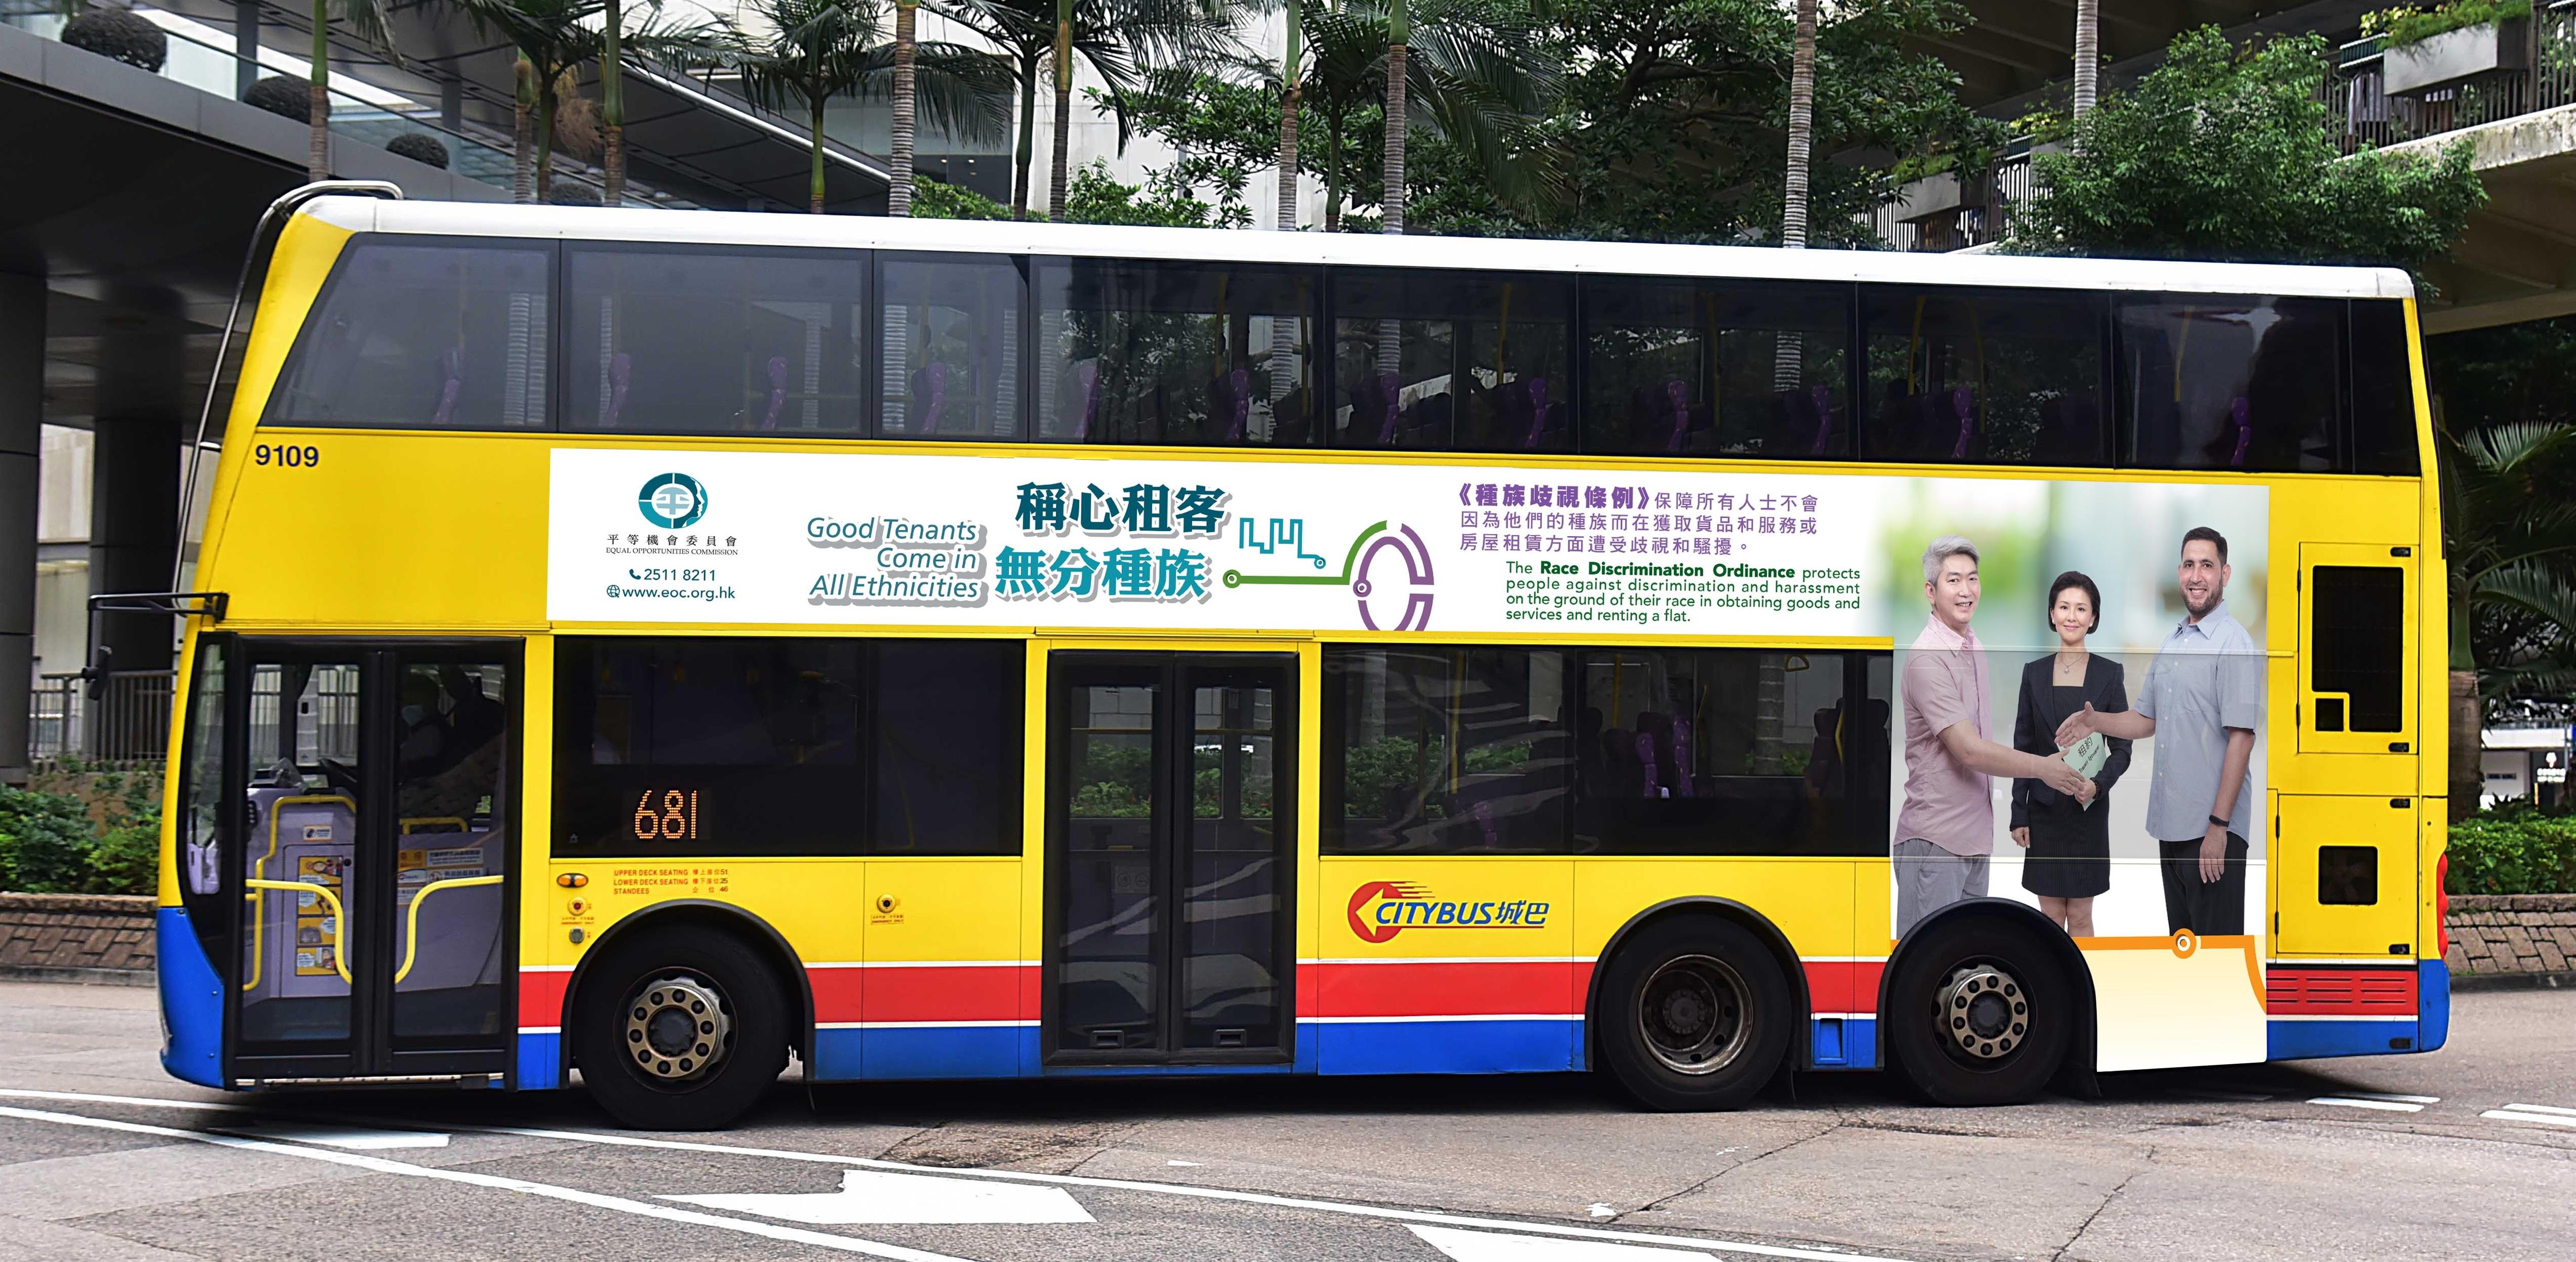 The EOC launched a bus body advertising campaign entitled “Good Tenants Come in All Ethnicities” to promote racial equality in tenancy.